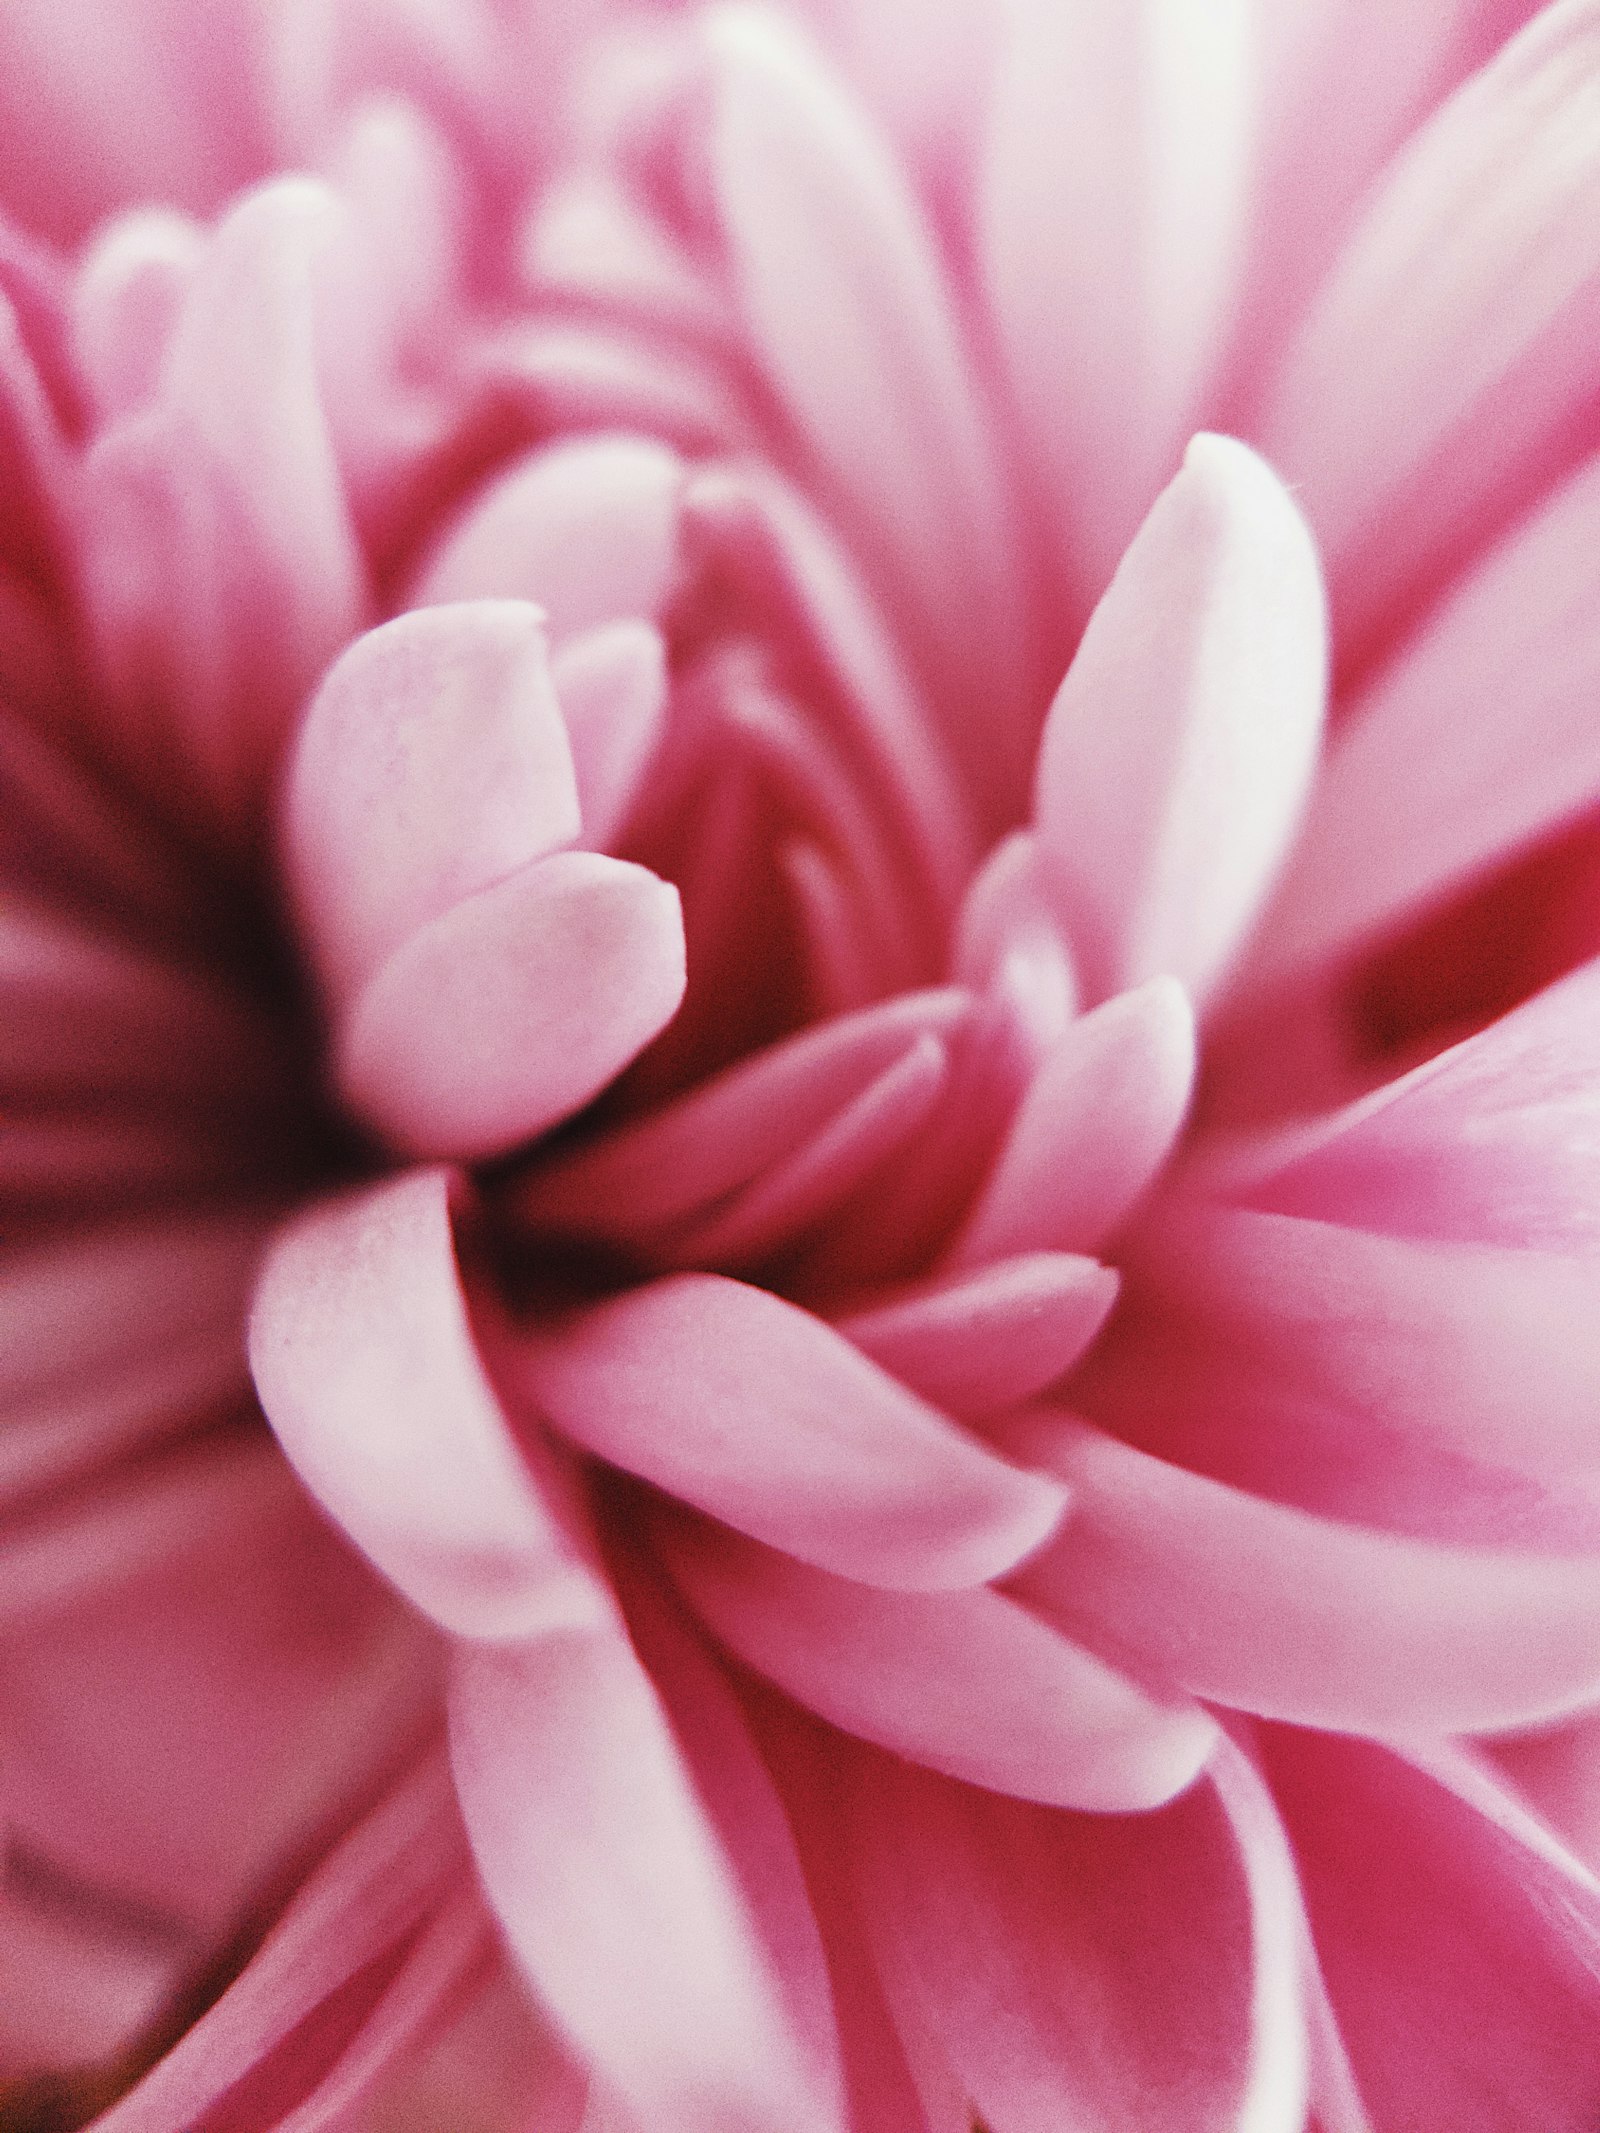 Moment Tele 58-60mm sample photo. Pink petaled flower photography